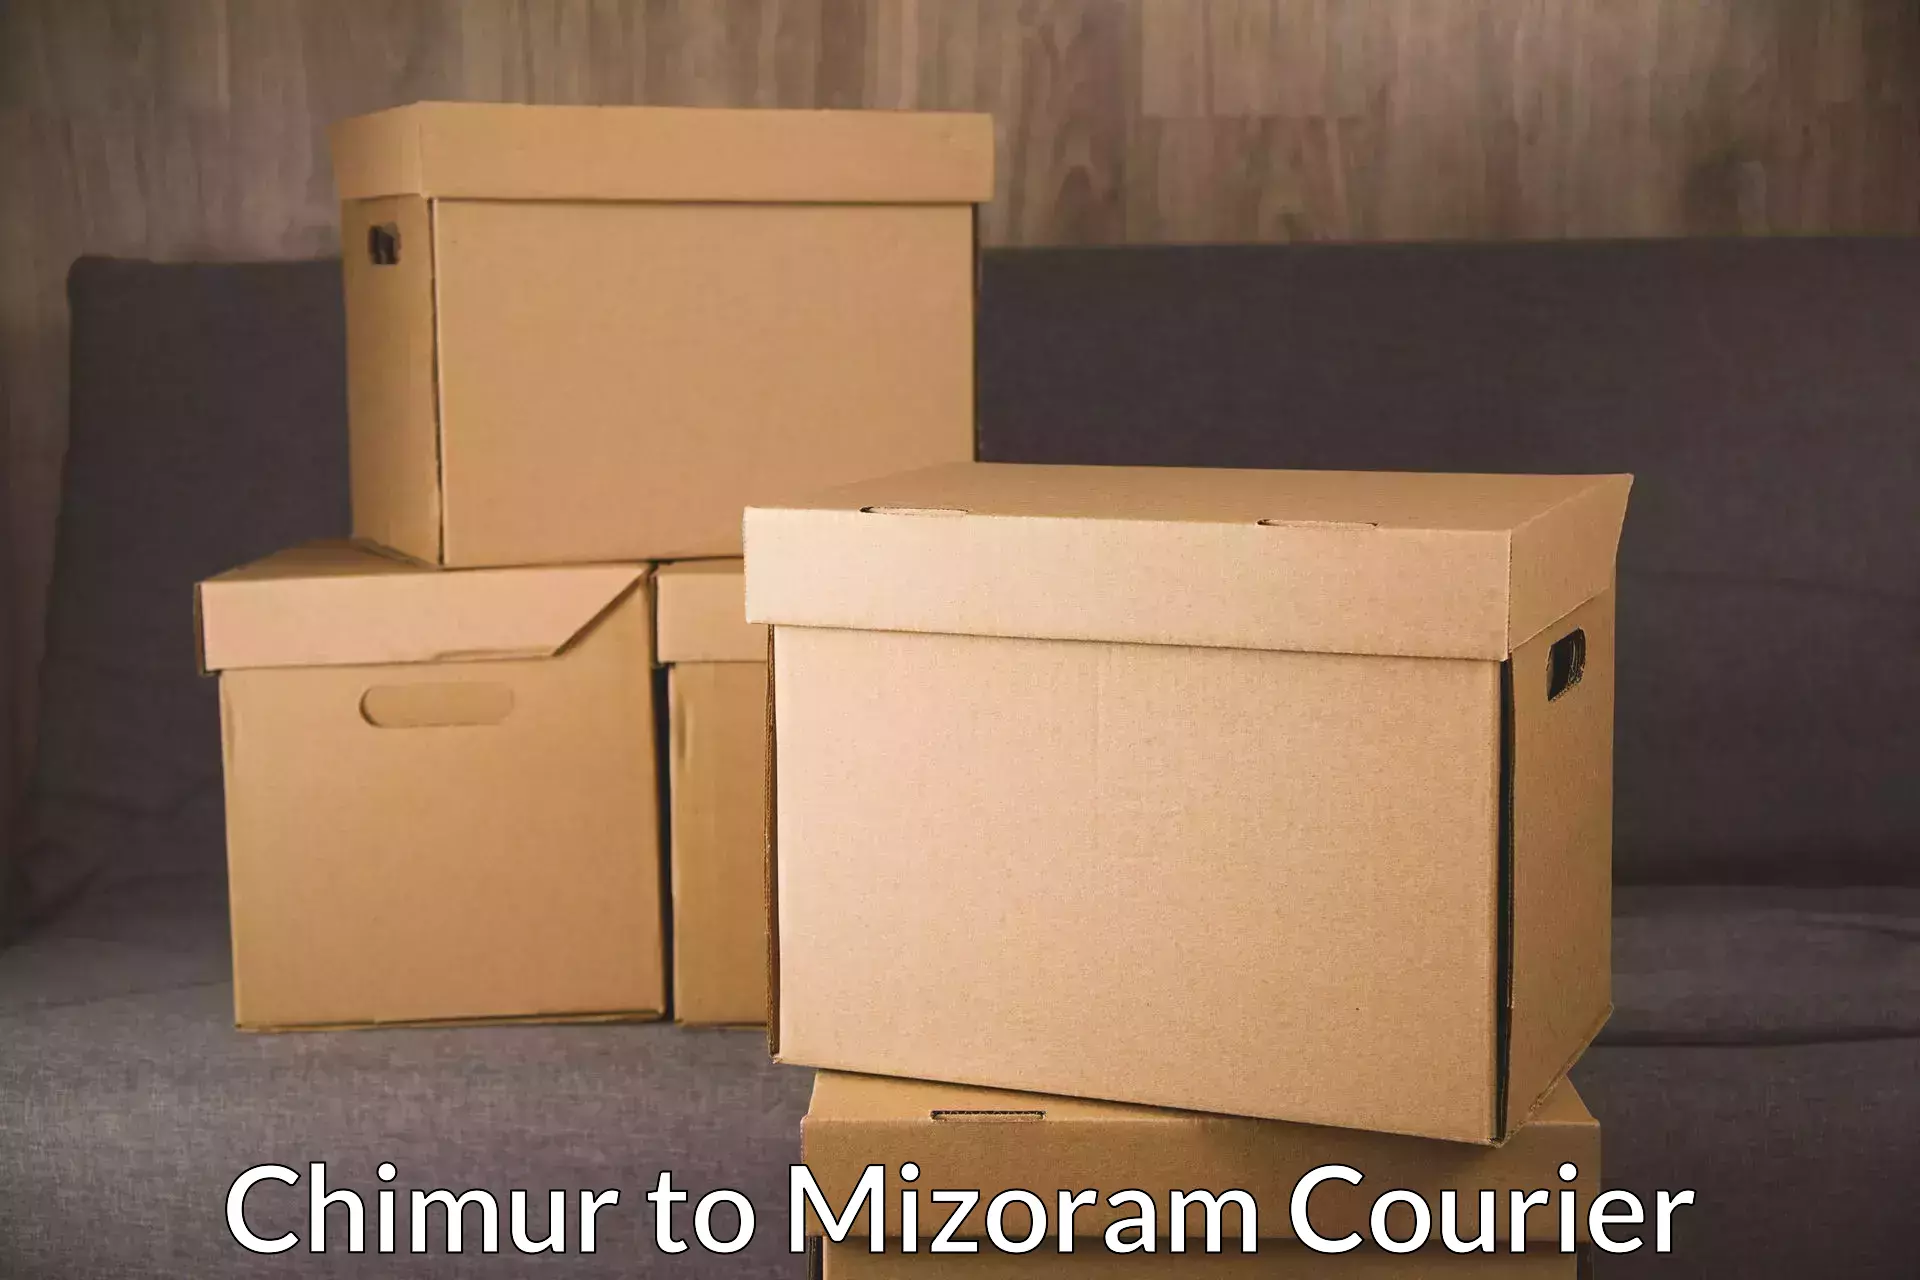 Nationwide delivery network Chimur to Mizoram